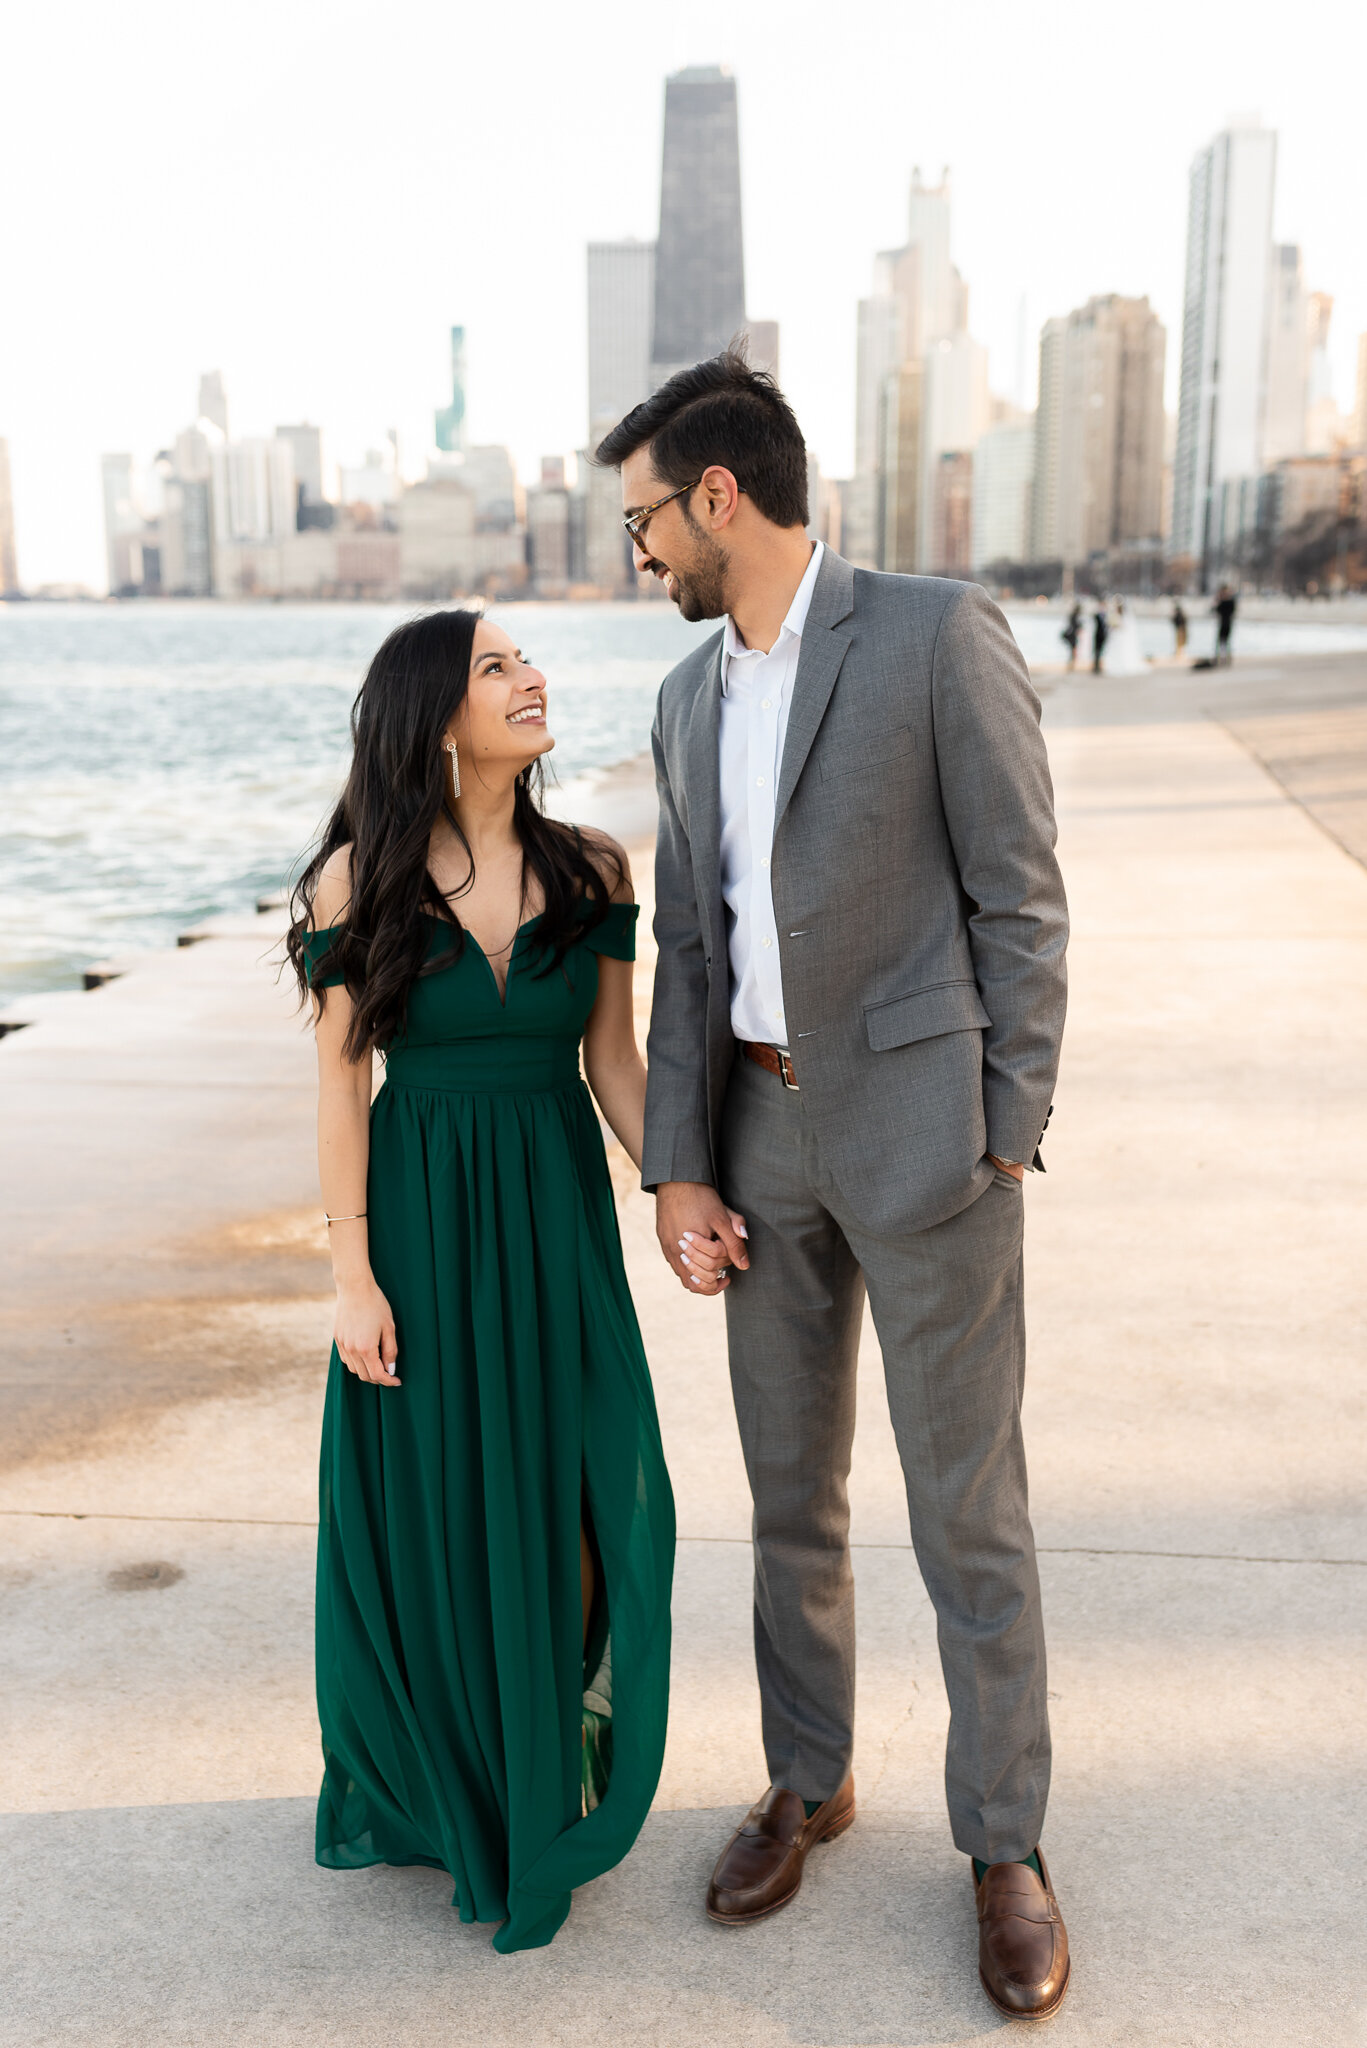 Glenview Engagement Photographer, Chicago Engagement Photographer, Chicago Engagement Photography, North Avenue Beach Engagement Session, Chicago Engagement Session (22 of 22).jpg